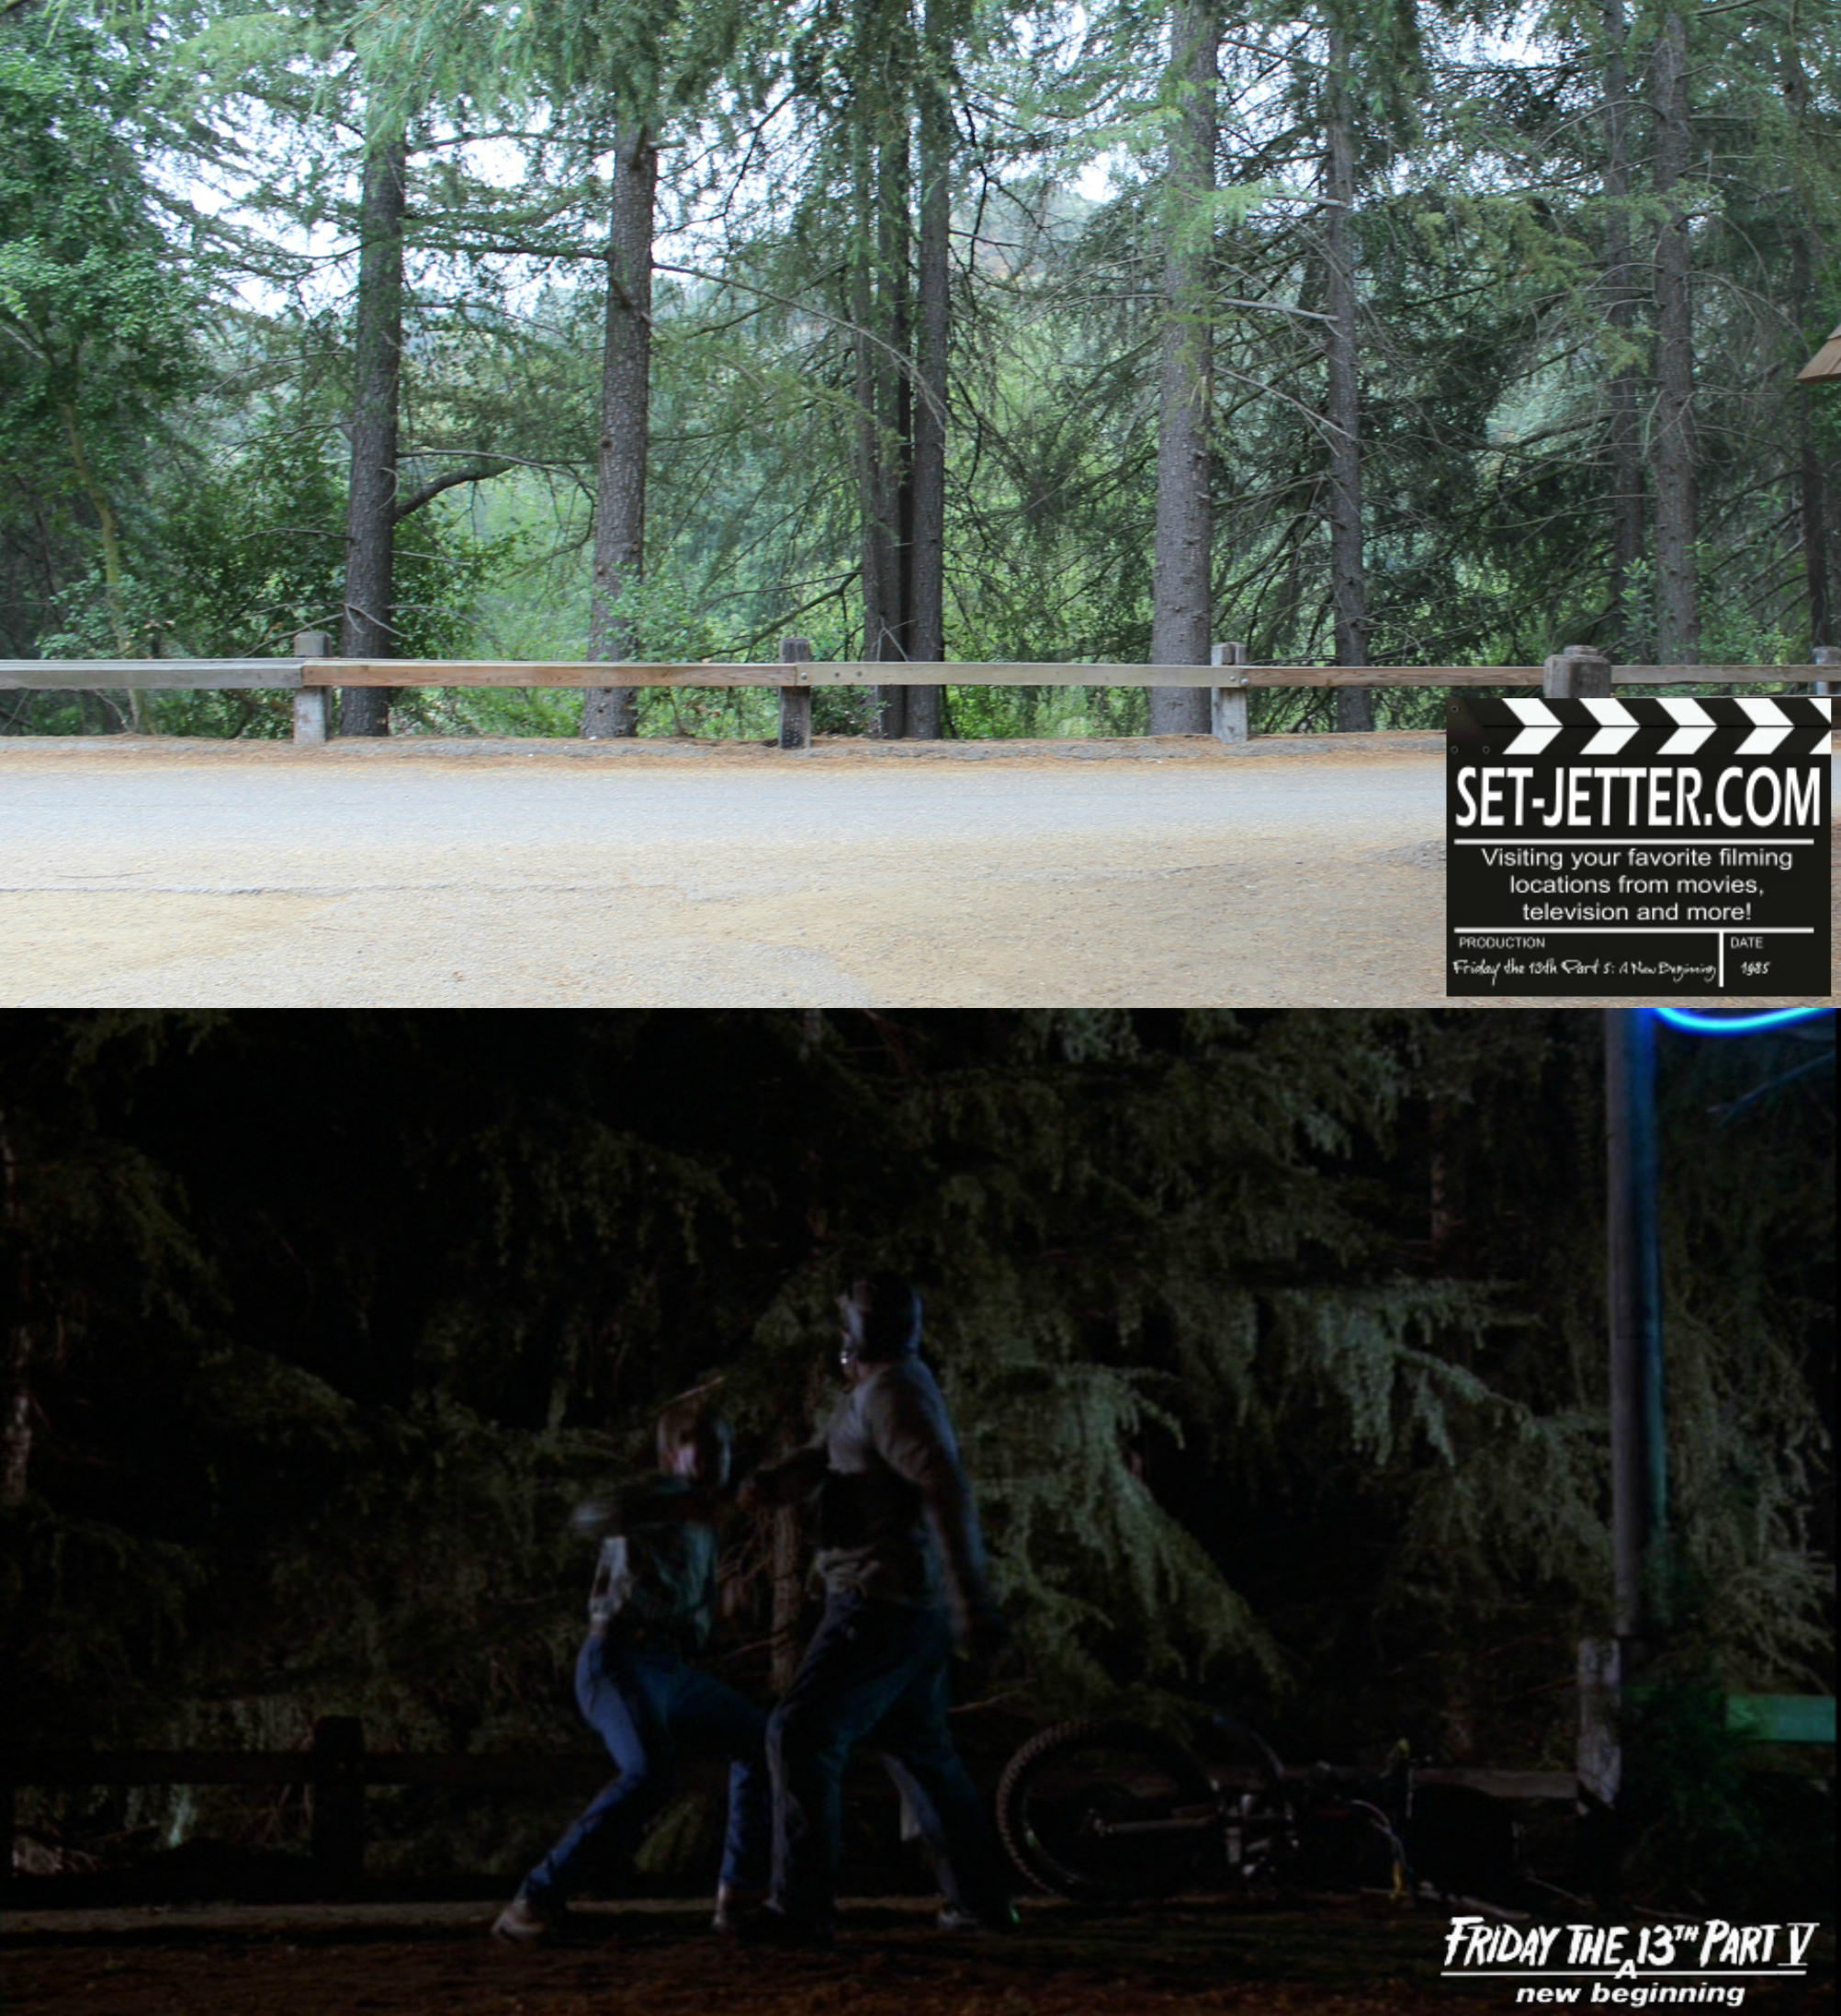 Friday the 13th Part V comparison 42.jpg